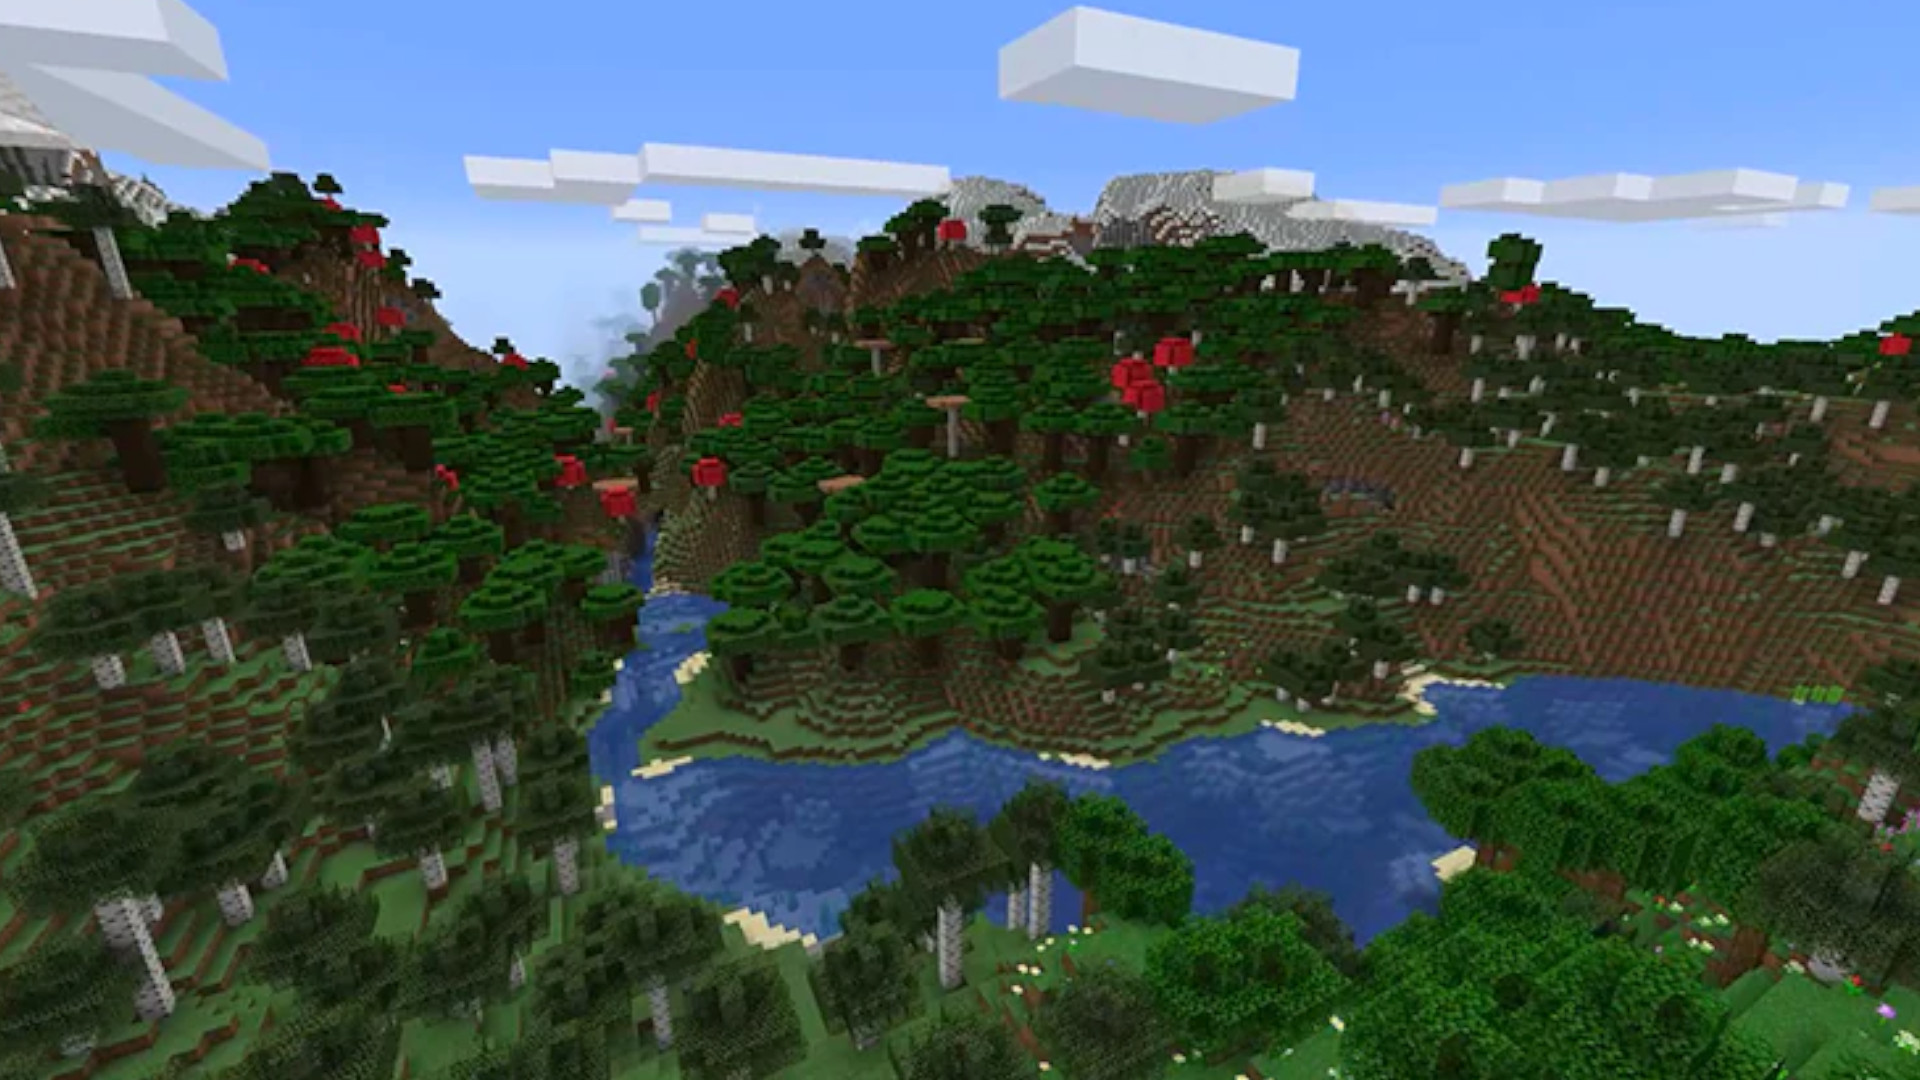 Minecraft’s world generation and monster spawns are changing completely